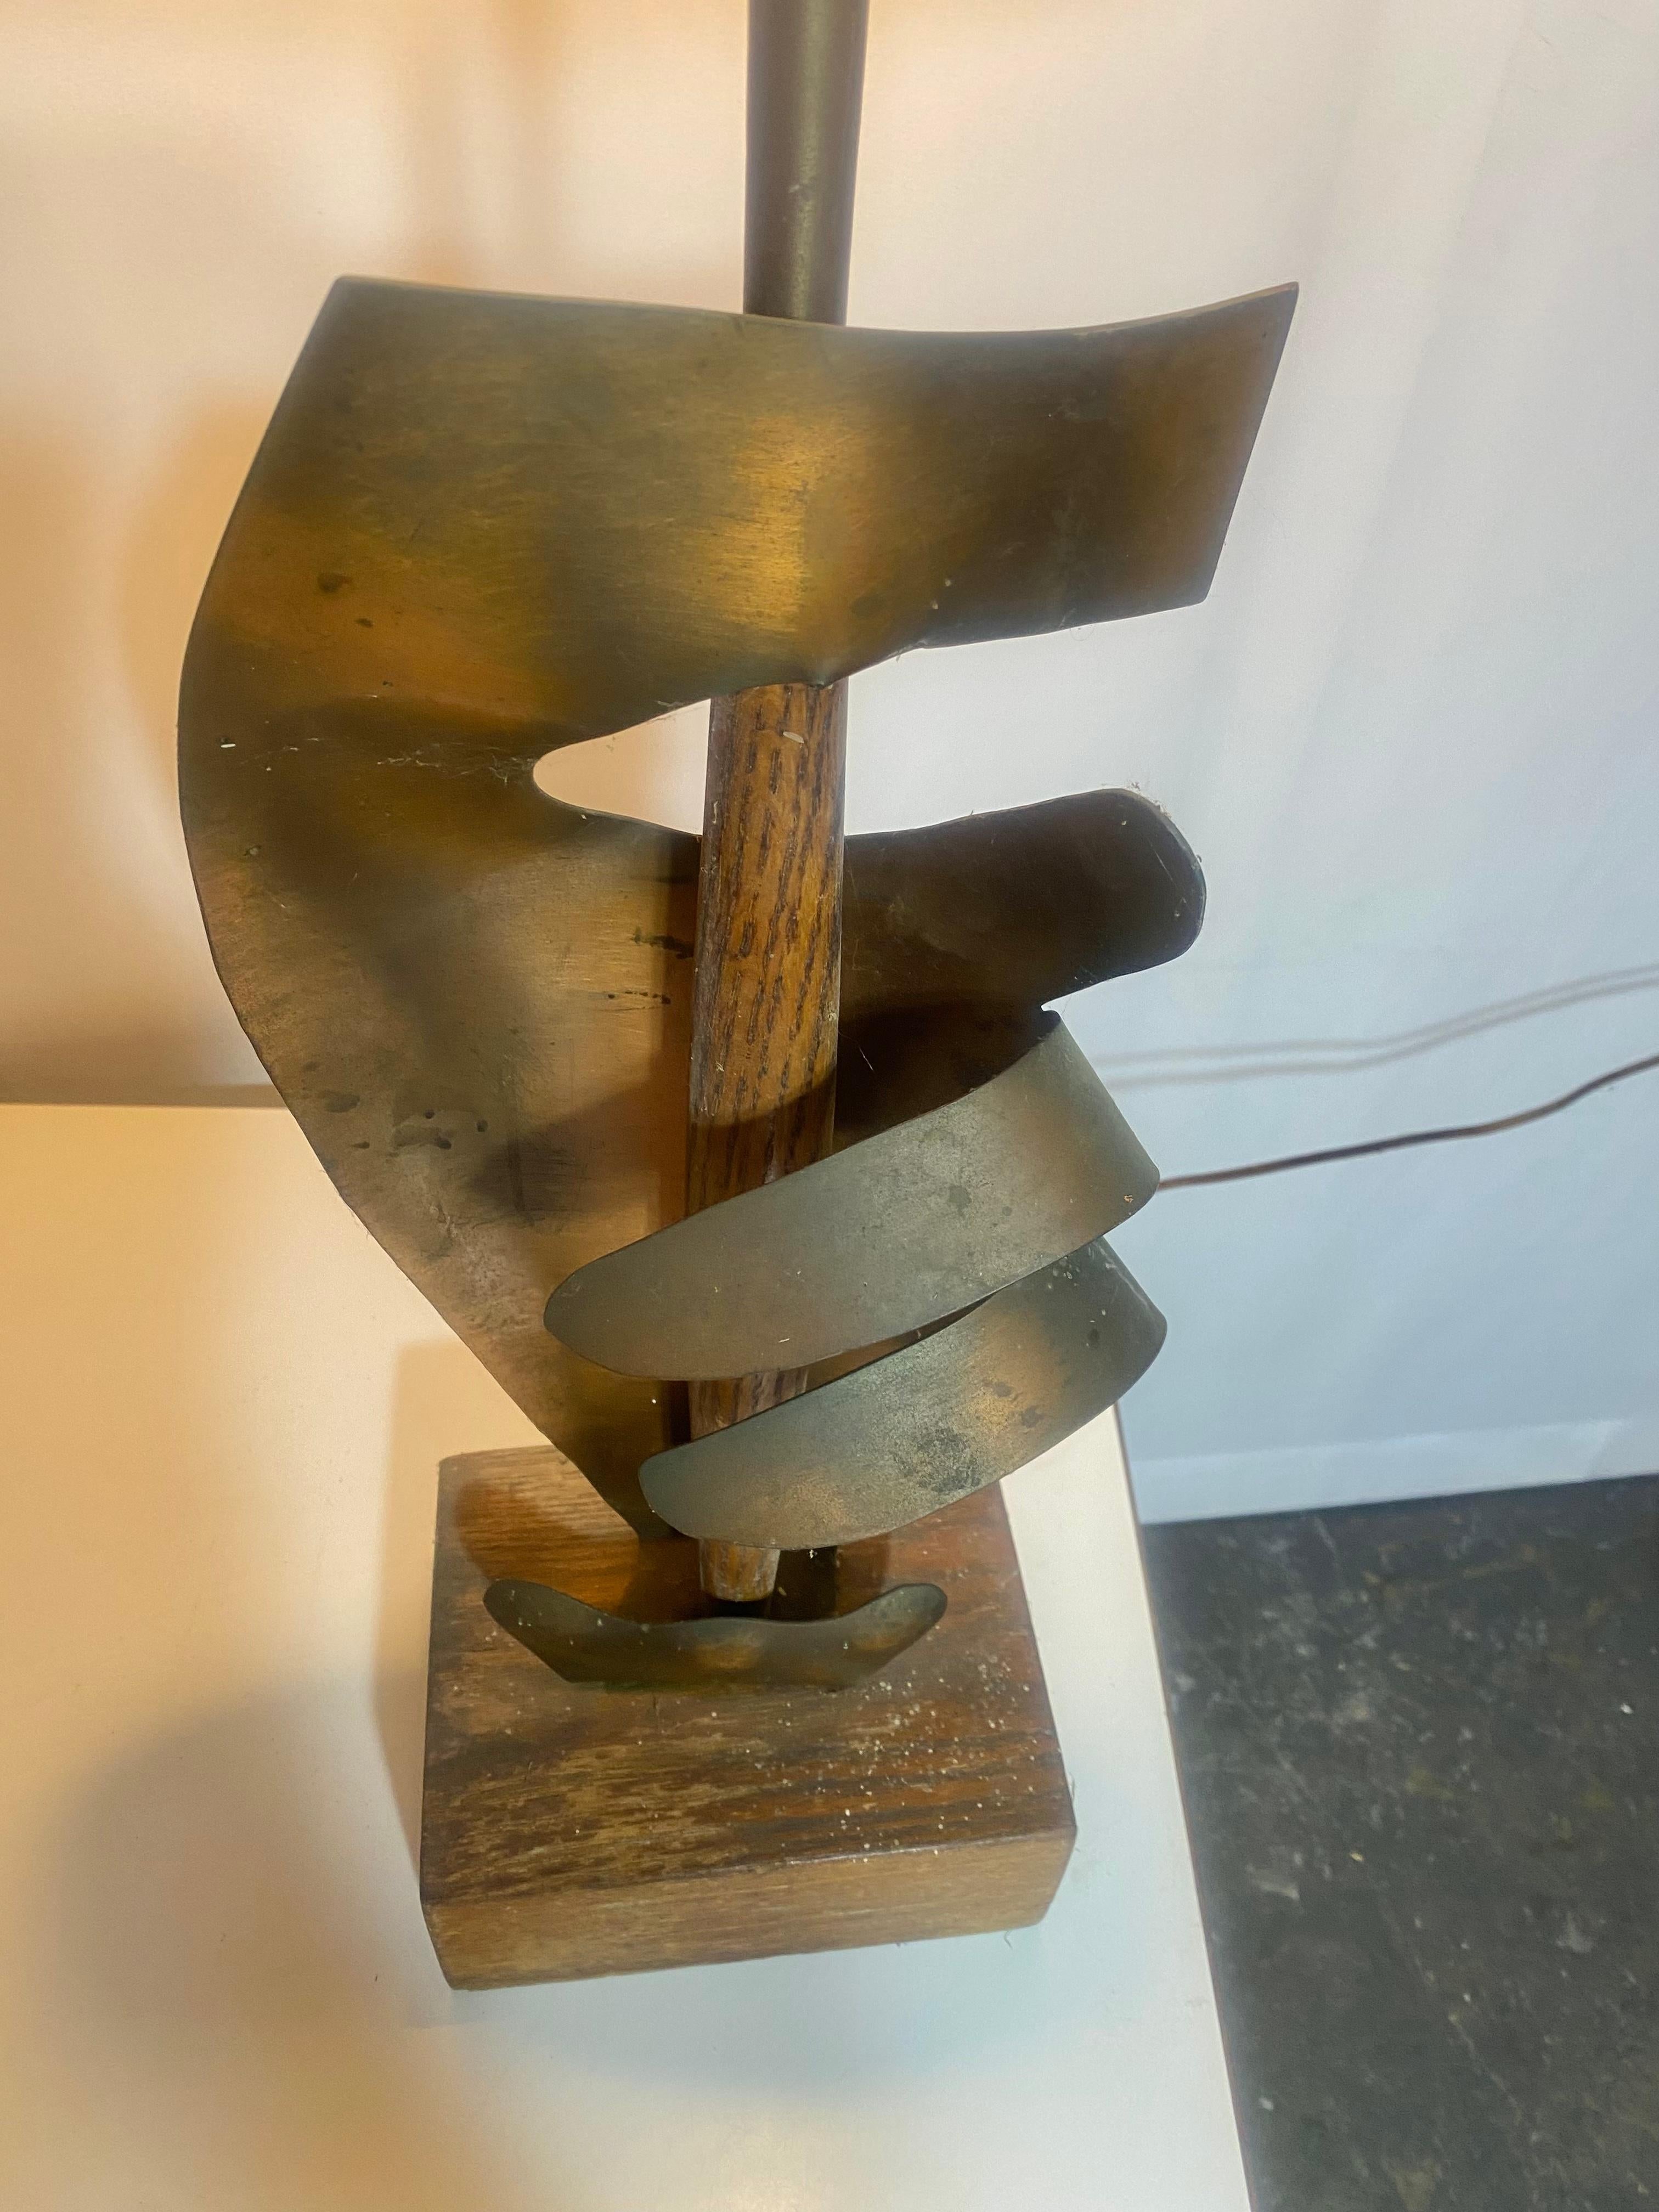 Mid Century Modern Yasha Heifetz Sculptural Abstract Copper HAND Table Lamp,, Retains original lamp shade and finial,, Signed Heifetz on base,,Classic Modernist design,, Seldom seen example,, 